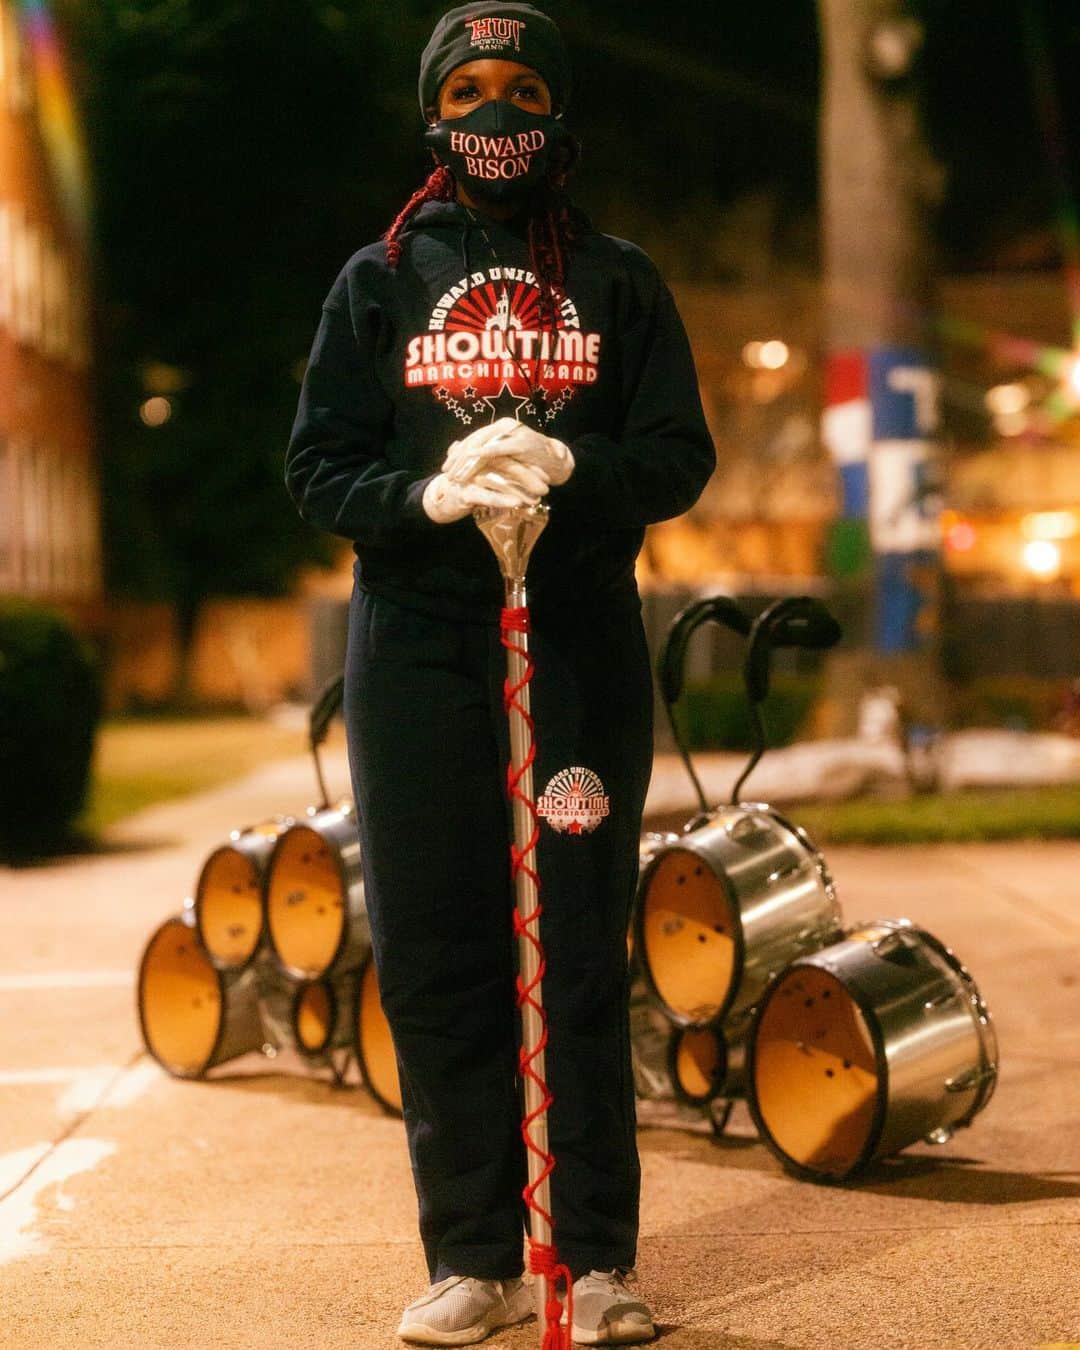 National Geographic Creativeのインスタグラム：「Photo by @jaredsoares  Destiny Moore, a drum major in Howard University’s Showtime March Band, waits during practice on January 19, 2021, on campus in Washington, D.C. The band will escort Vice President-elect Kamala Harris, a graduate of Howard, for the 59th presidential Inauguration. Due to safety precautions, only about a third of the band's members will be able to participate, including the drumline, Flashy Flag Squad, and Ooh La La dancers.」